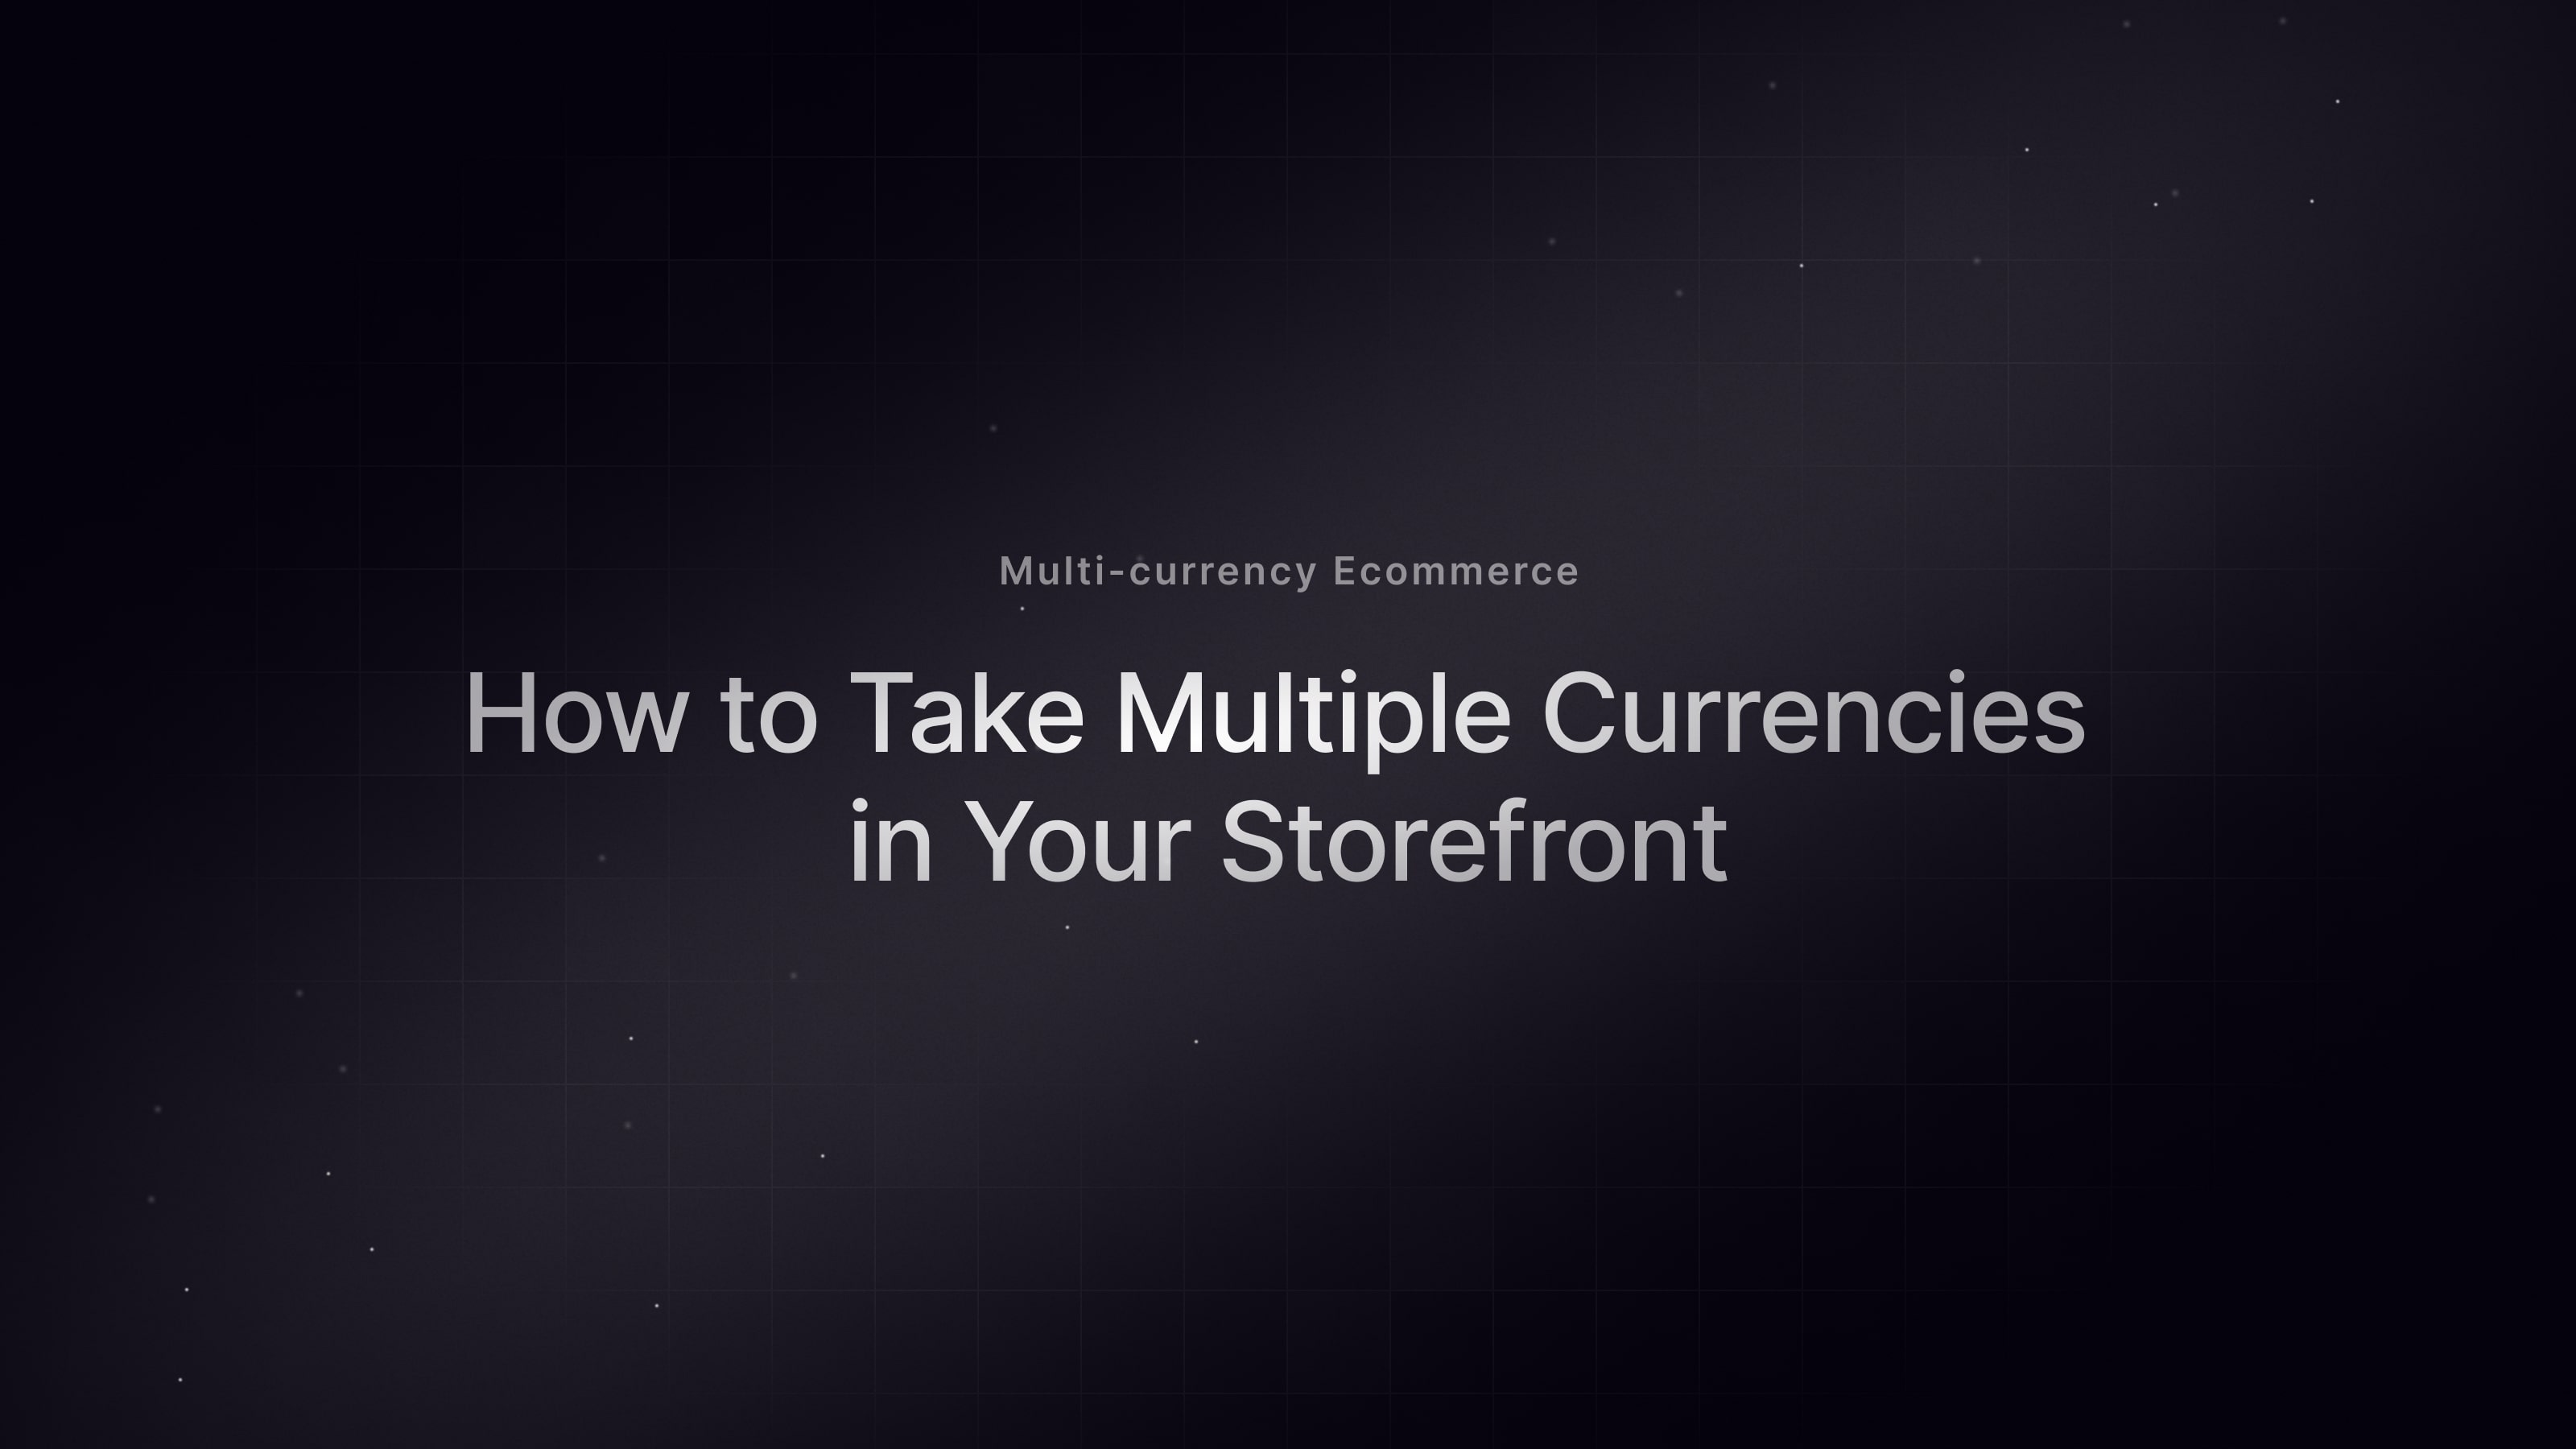 Multi-currency Ecommerce: How to Take Multiple Currencies in Your Storefront